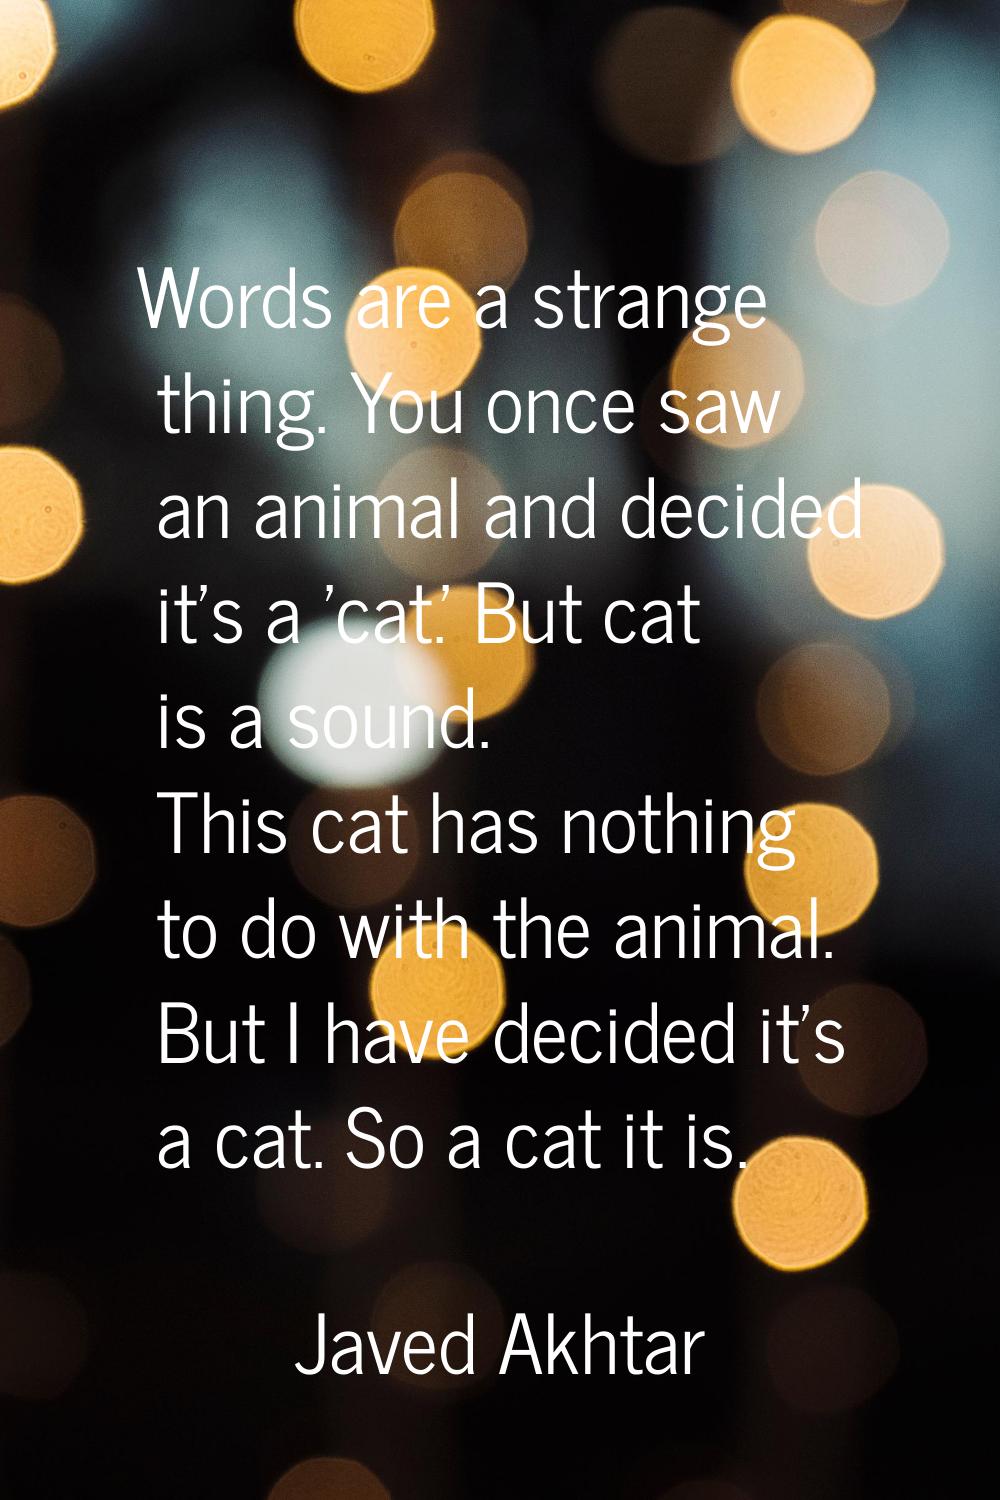 Words are a strange thing. You once saw an animal and decided it's a 'cat.' But cat is a sound. Thi